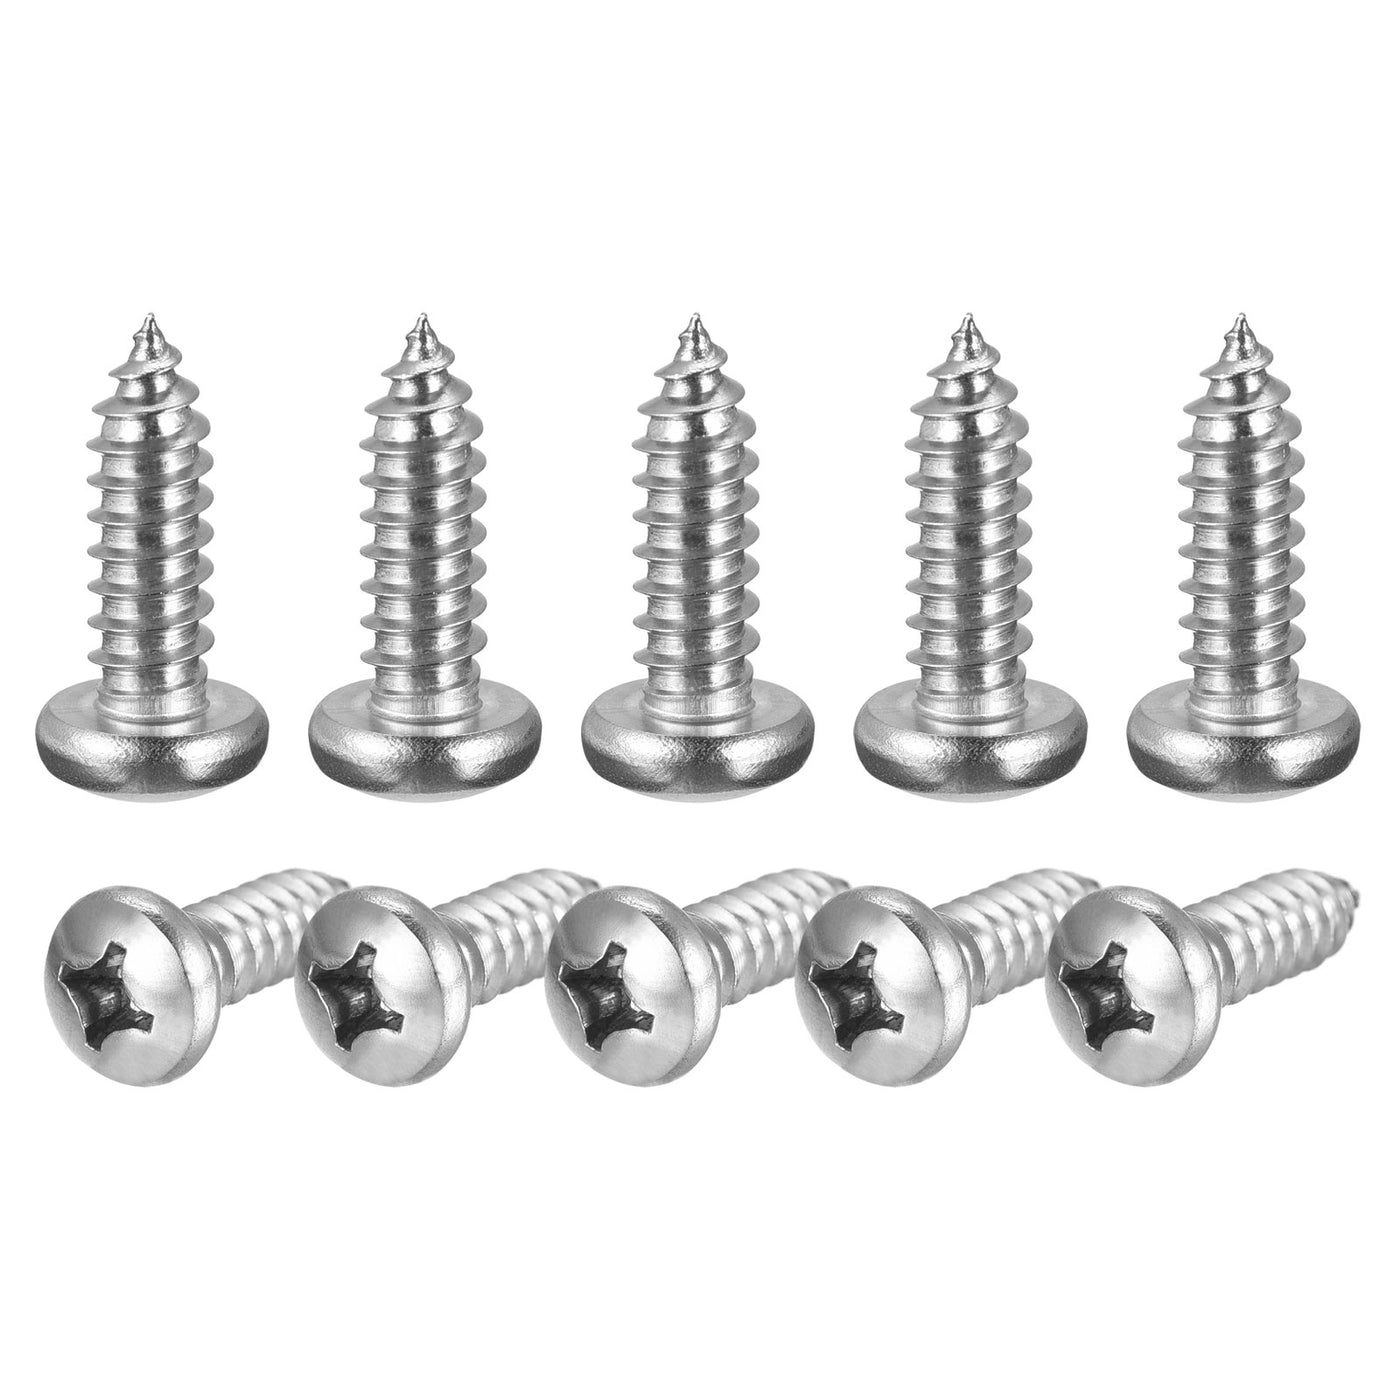 uxcell Uxcell Screws #14x3/4" Phillips Self Tapping Screw 304 Stainless Steel 25pcs